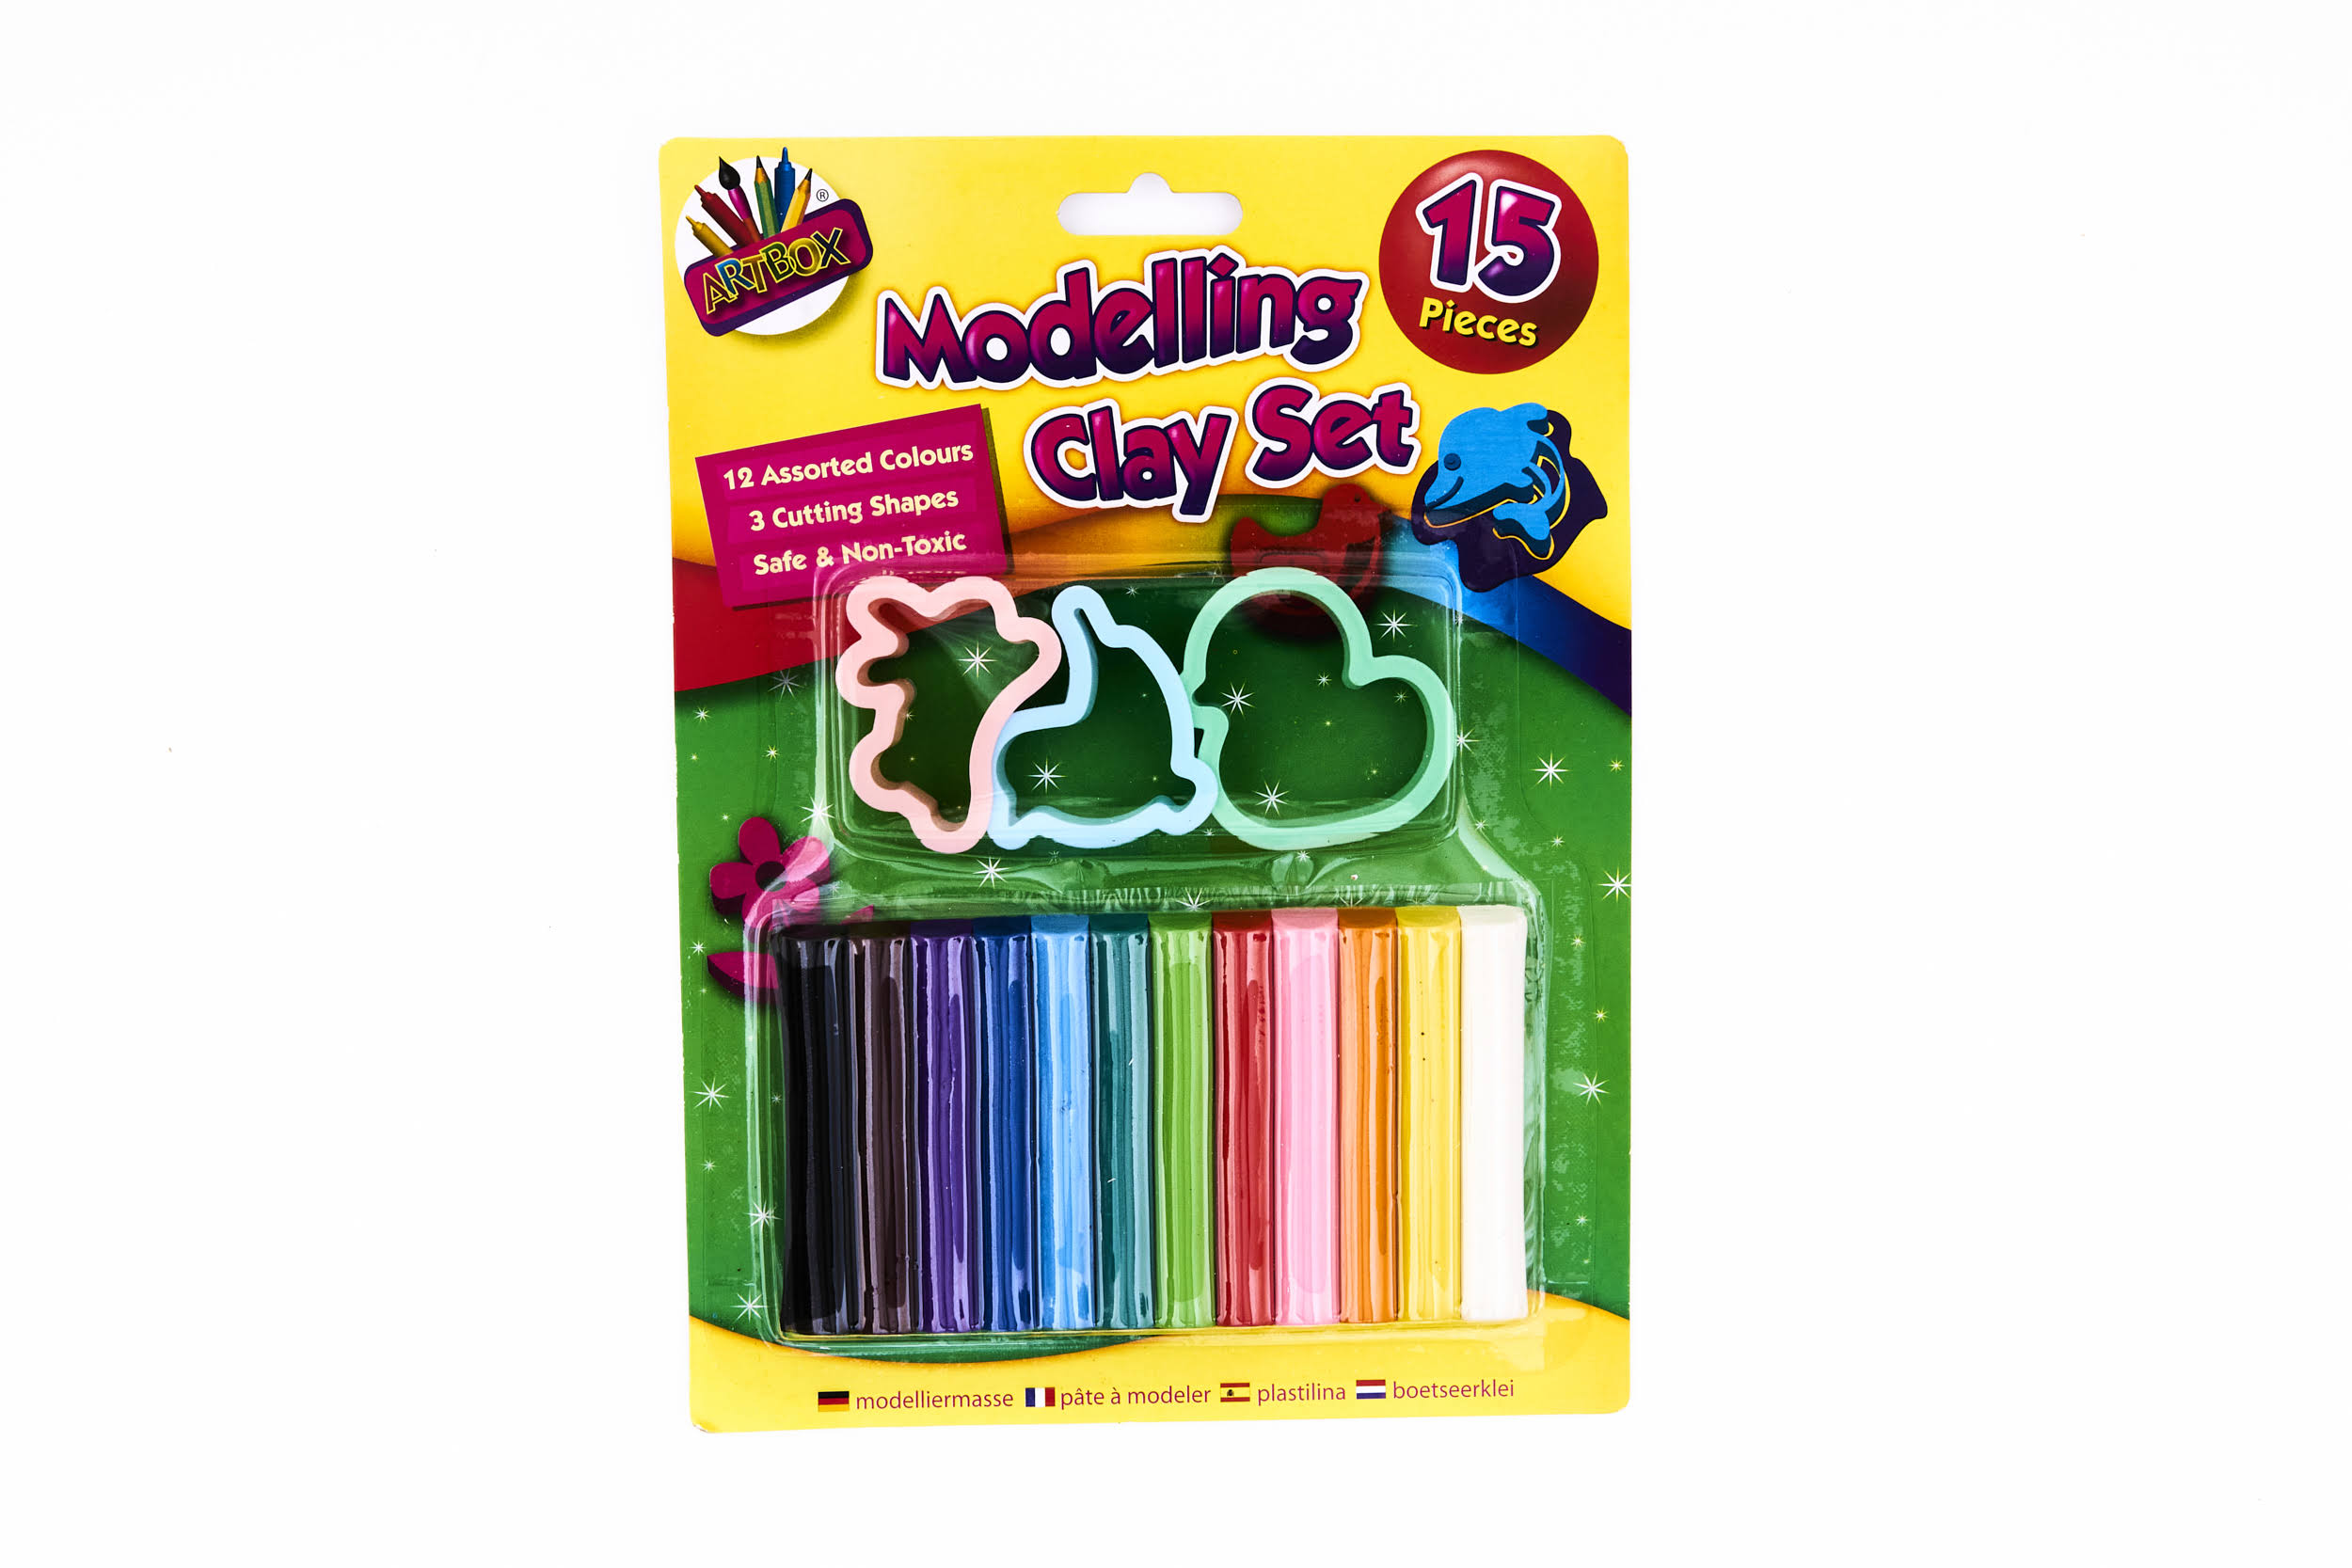 Artbox Childrens Modelling Clay Kit - 12 Colours, 3 Moulds